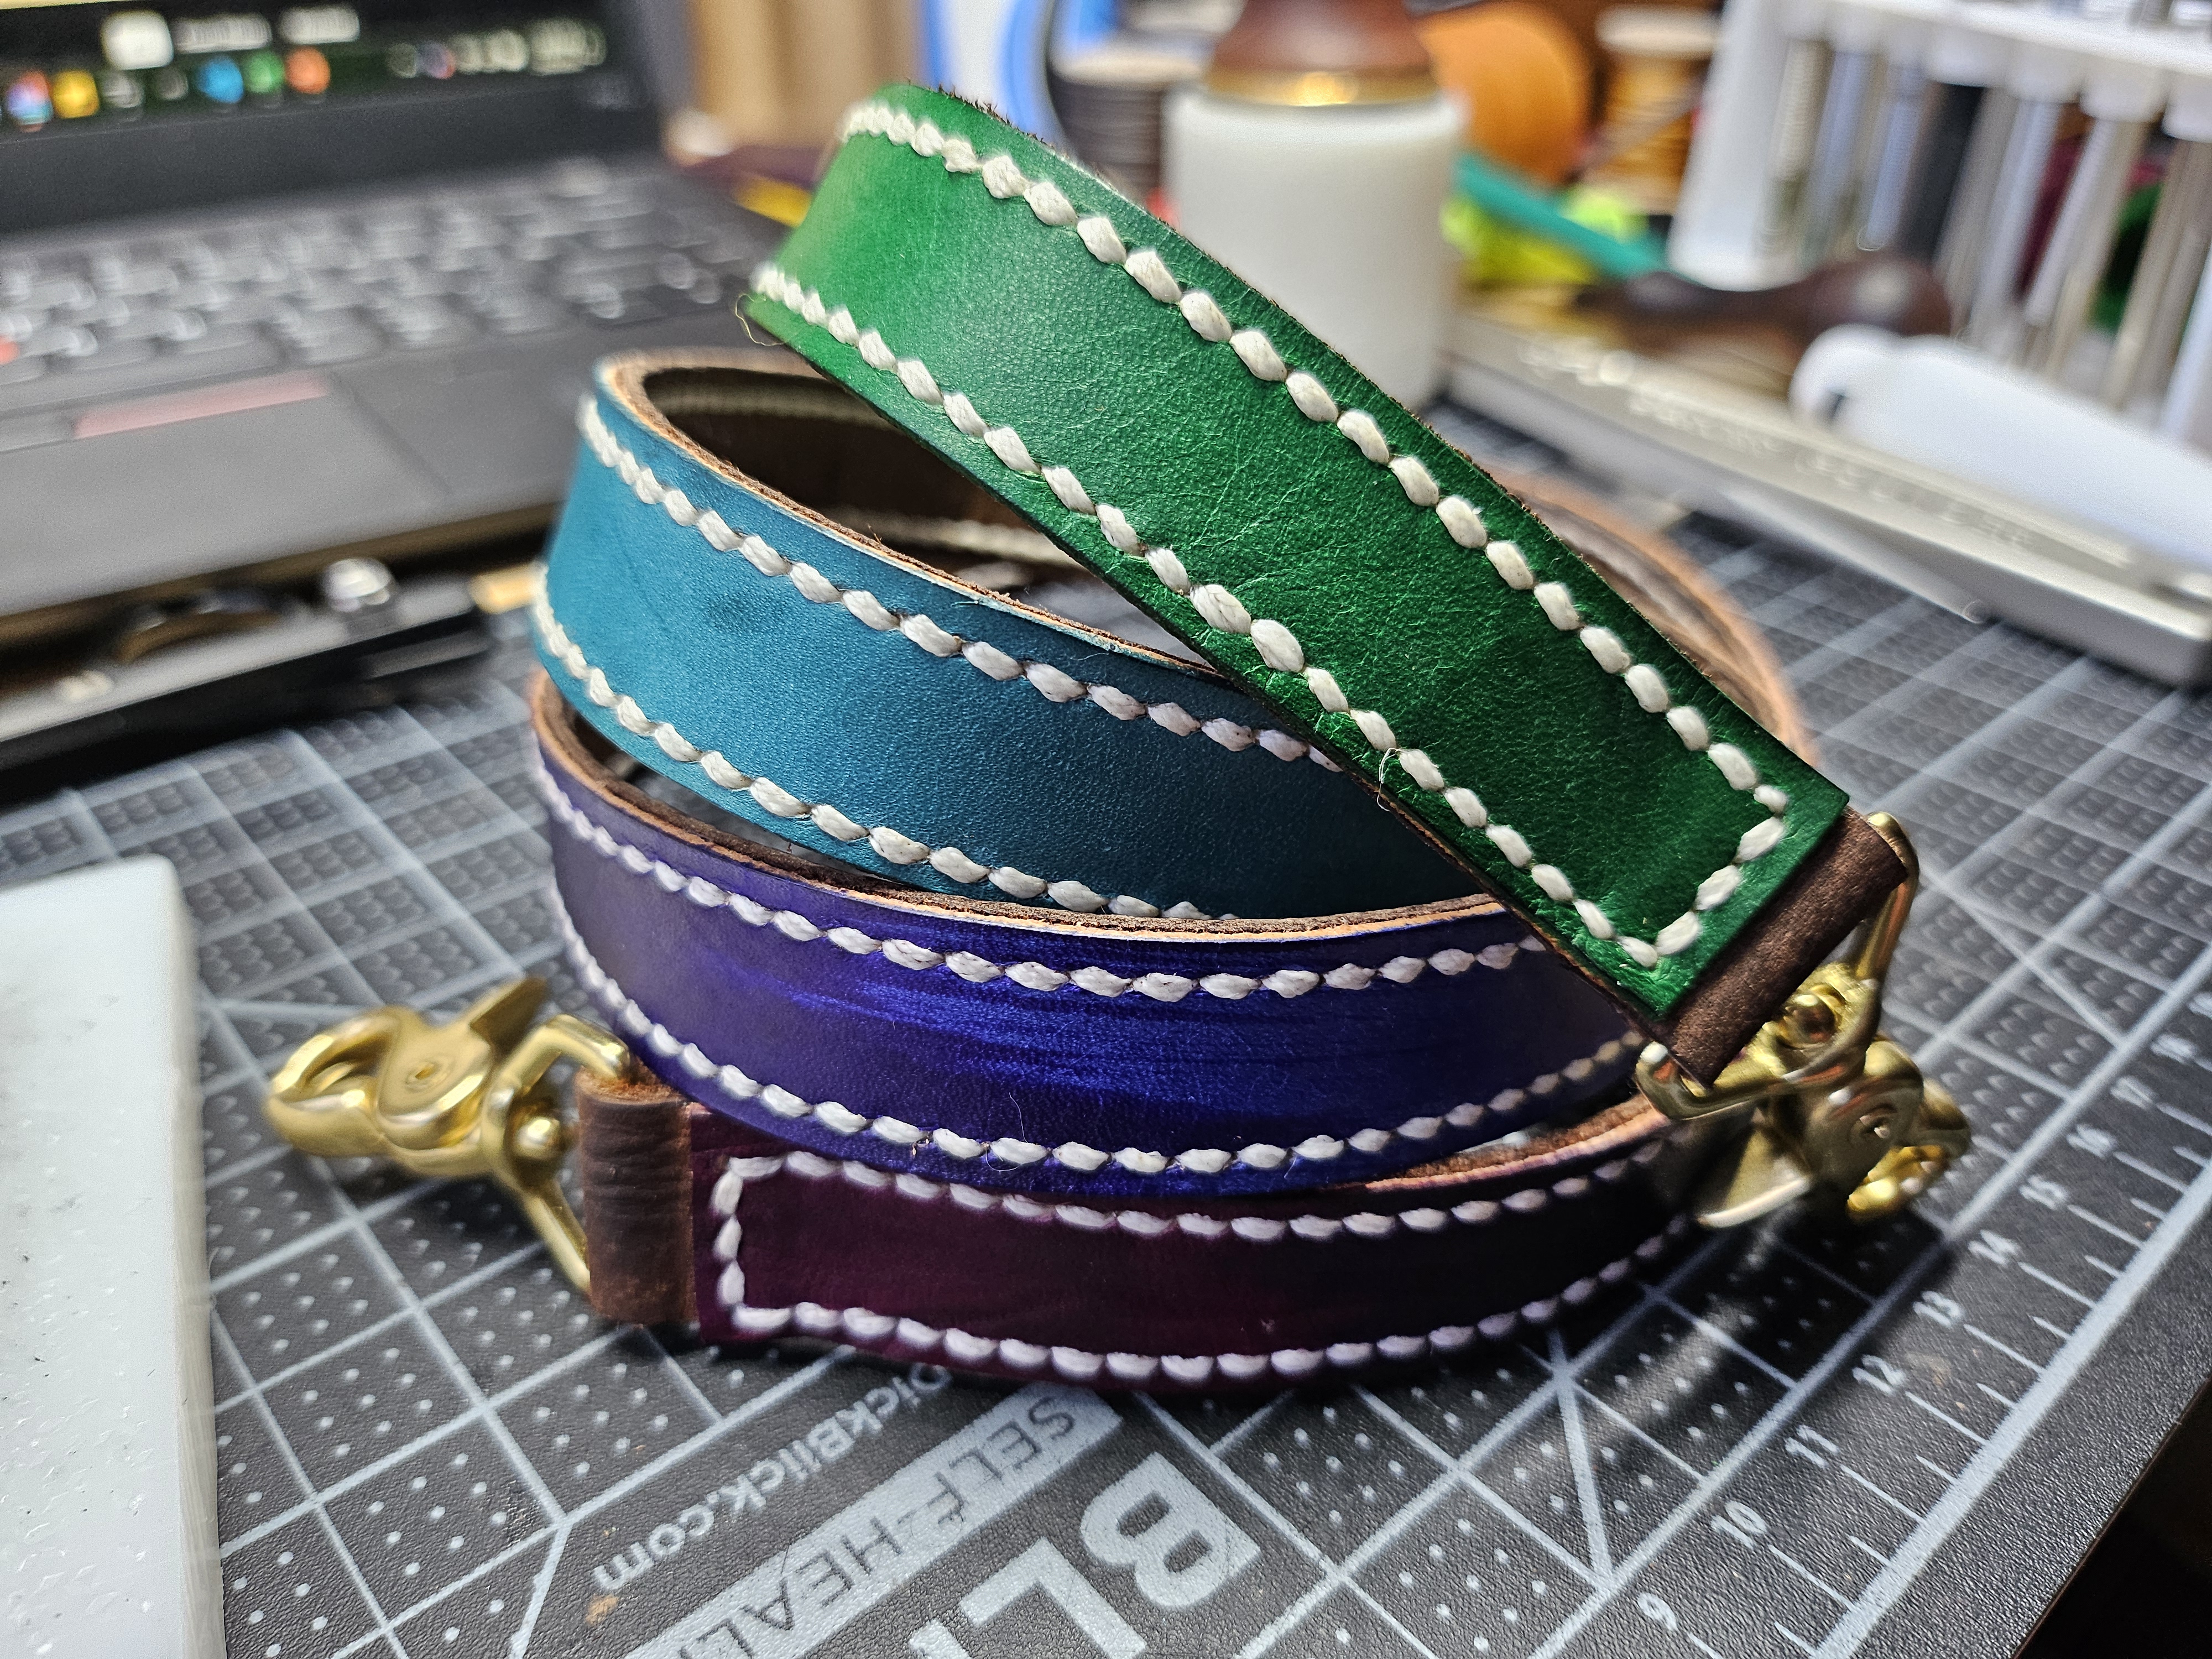 a coiled up purse strap in gradient cool colors - we can see green, teal, indigo, and a slightly pinkish purple. It has brass hardware and is stiched along its length with cream stitches.